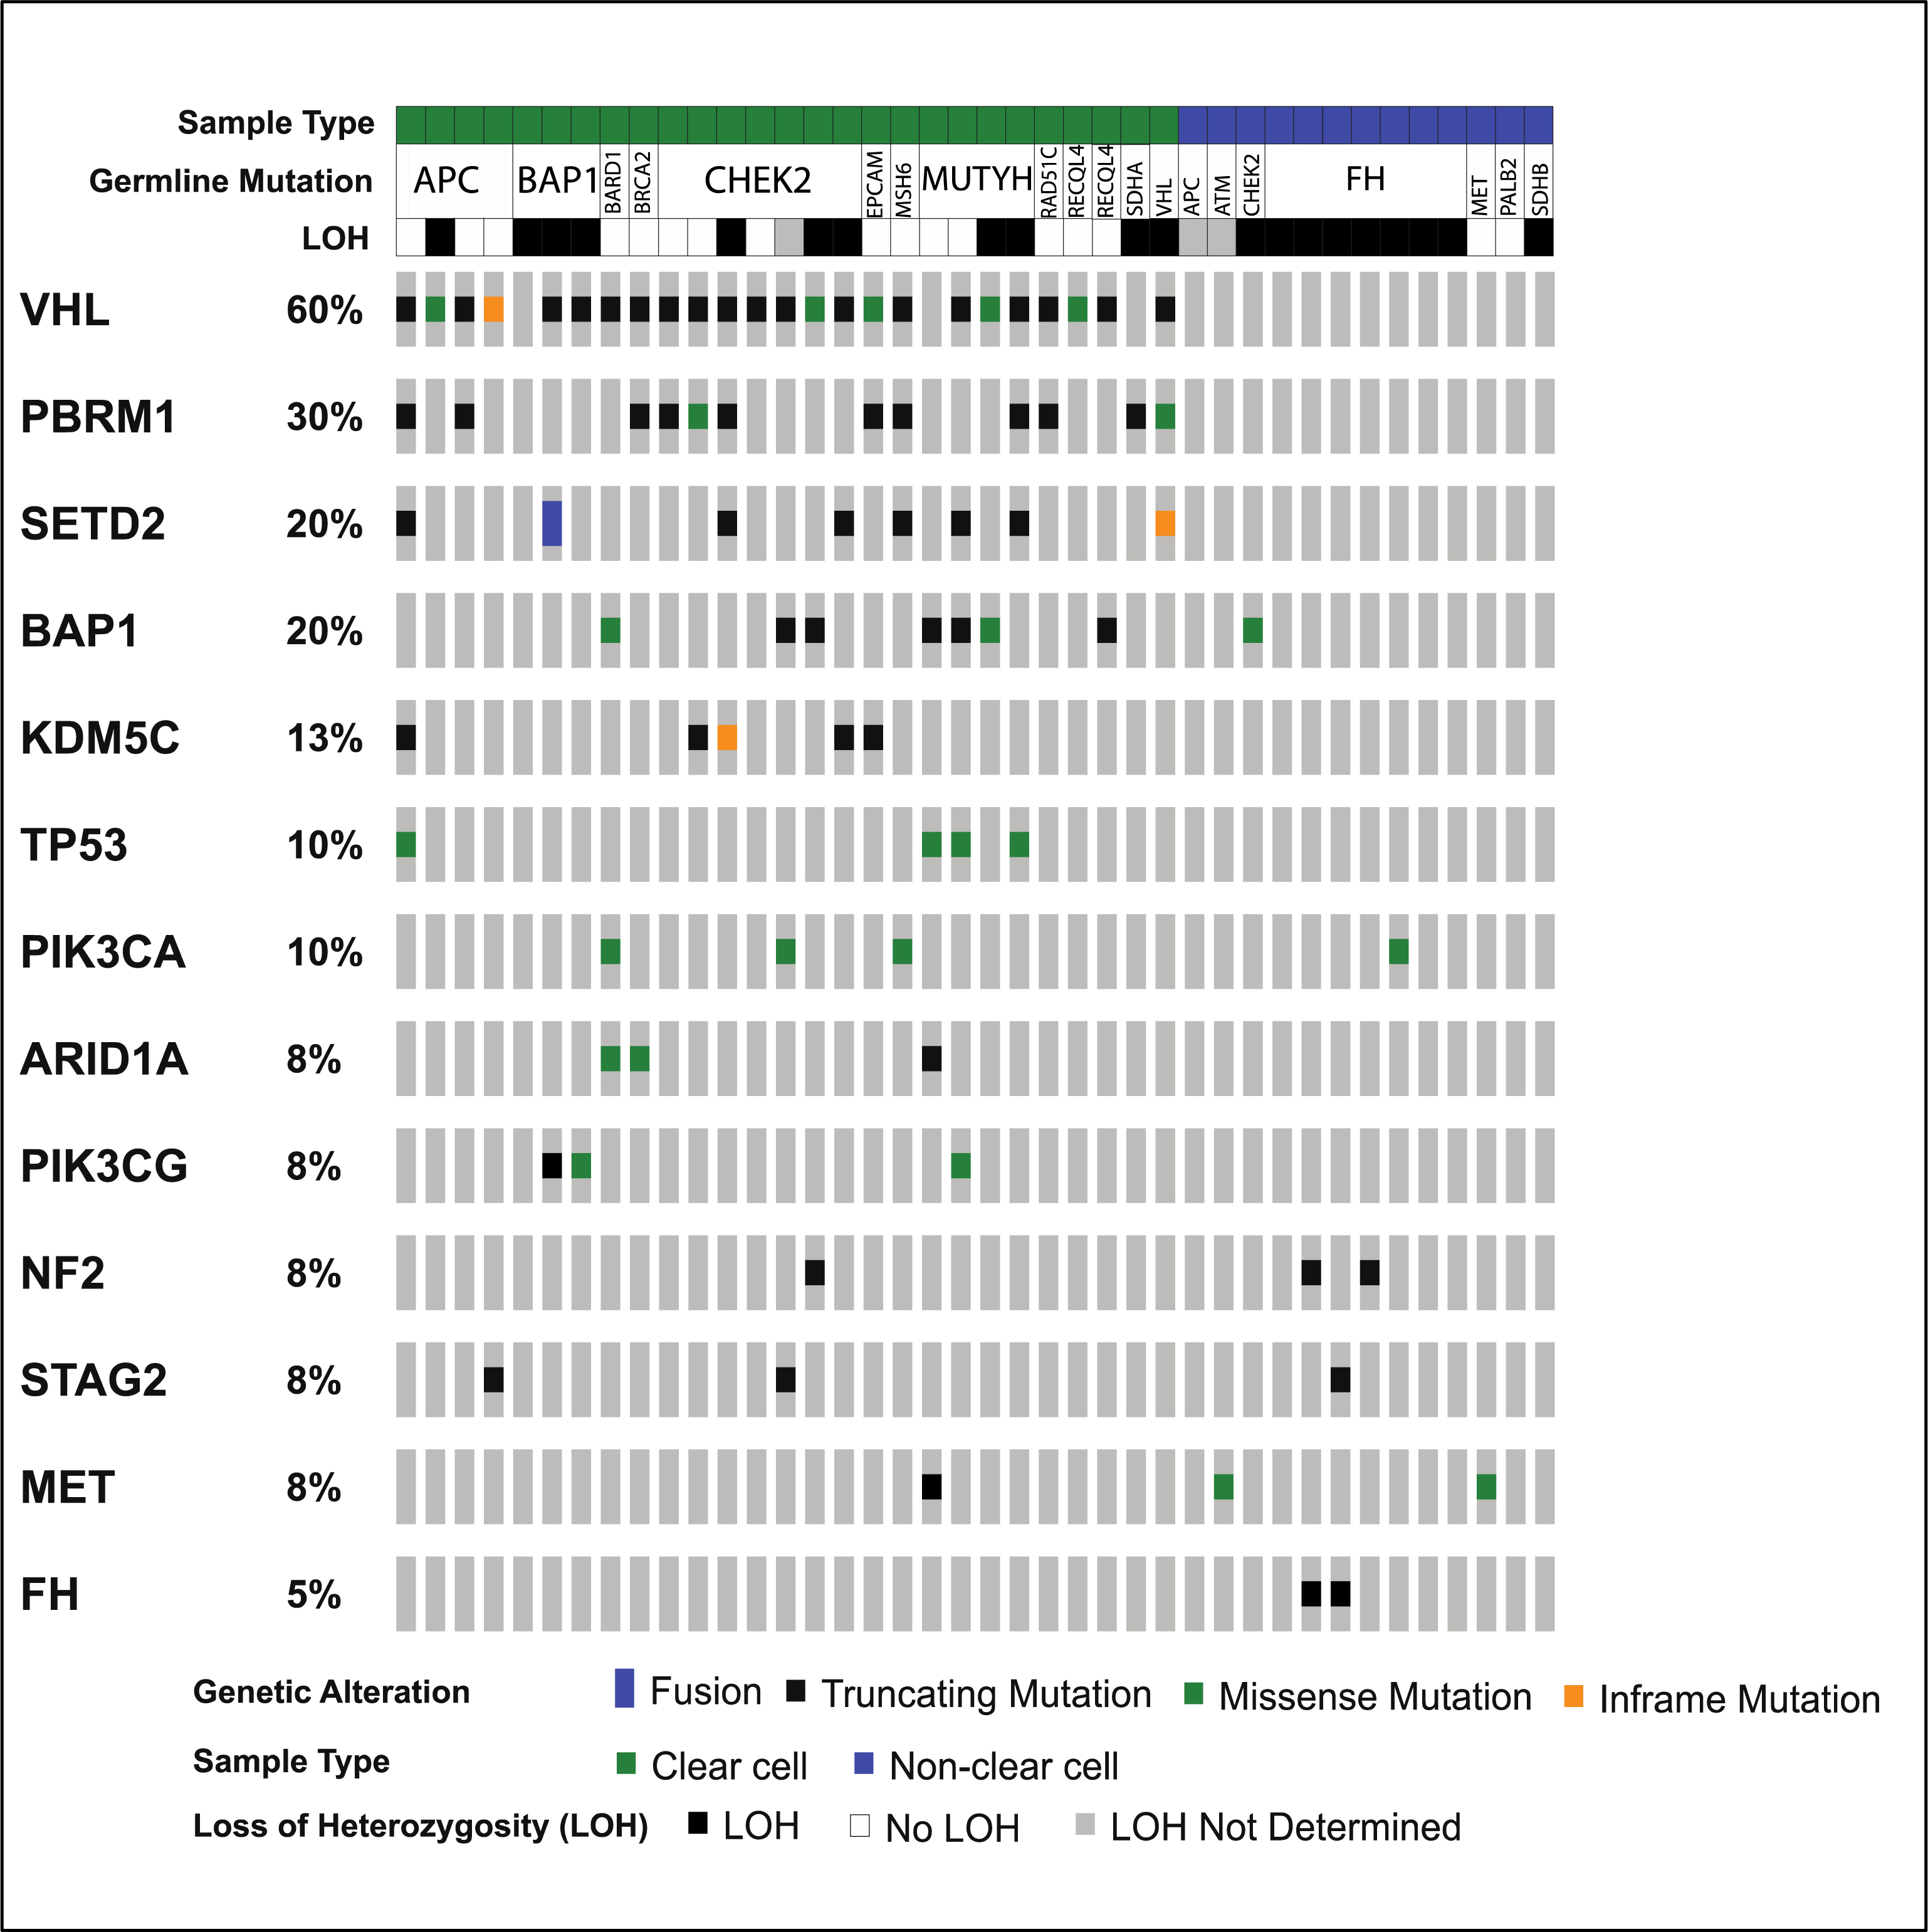 Somatic mutations and loss of heterozygosity in patients with germline mutations